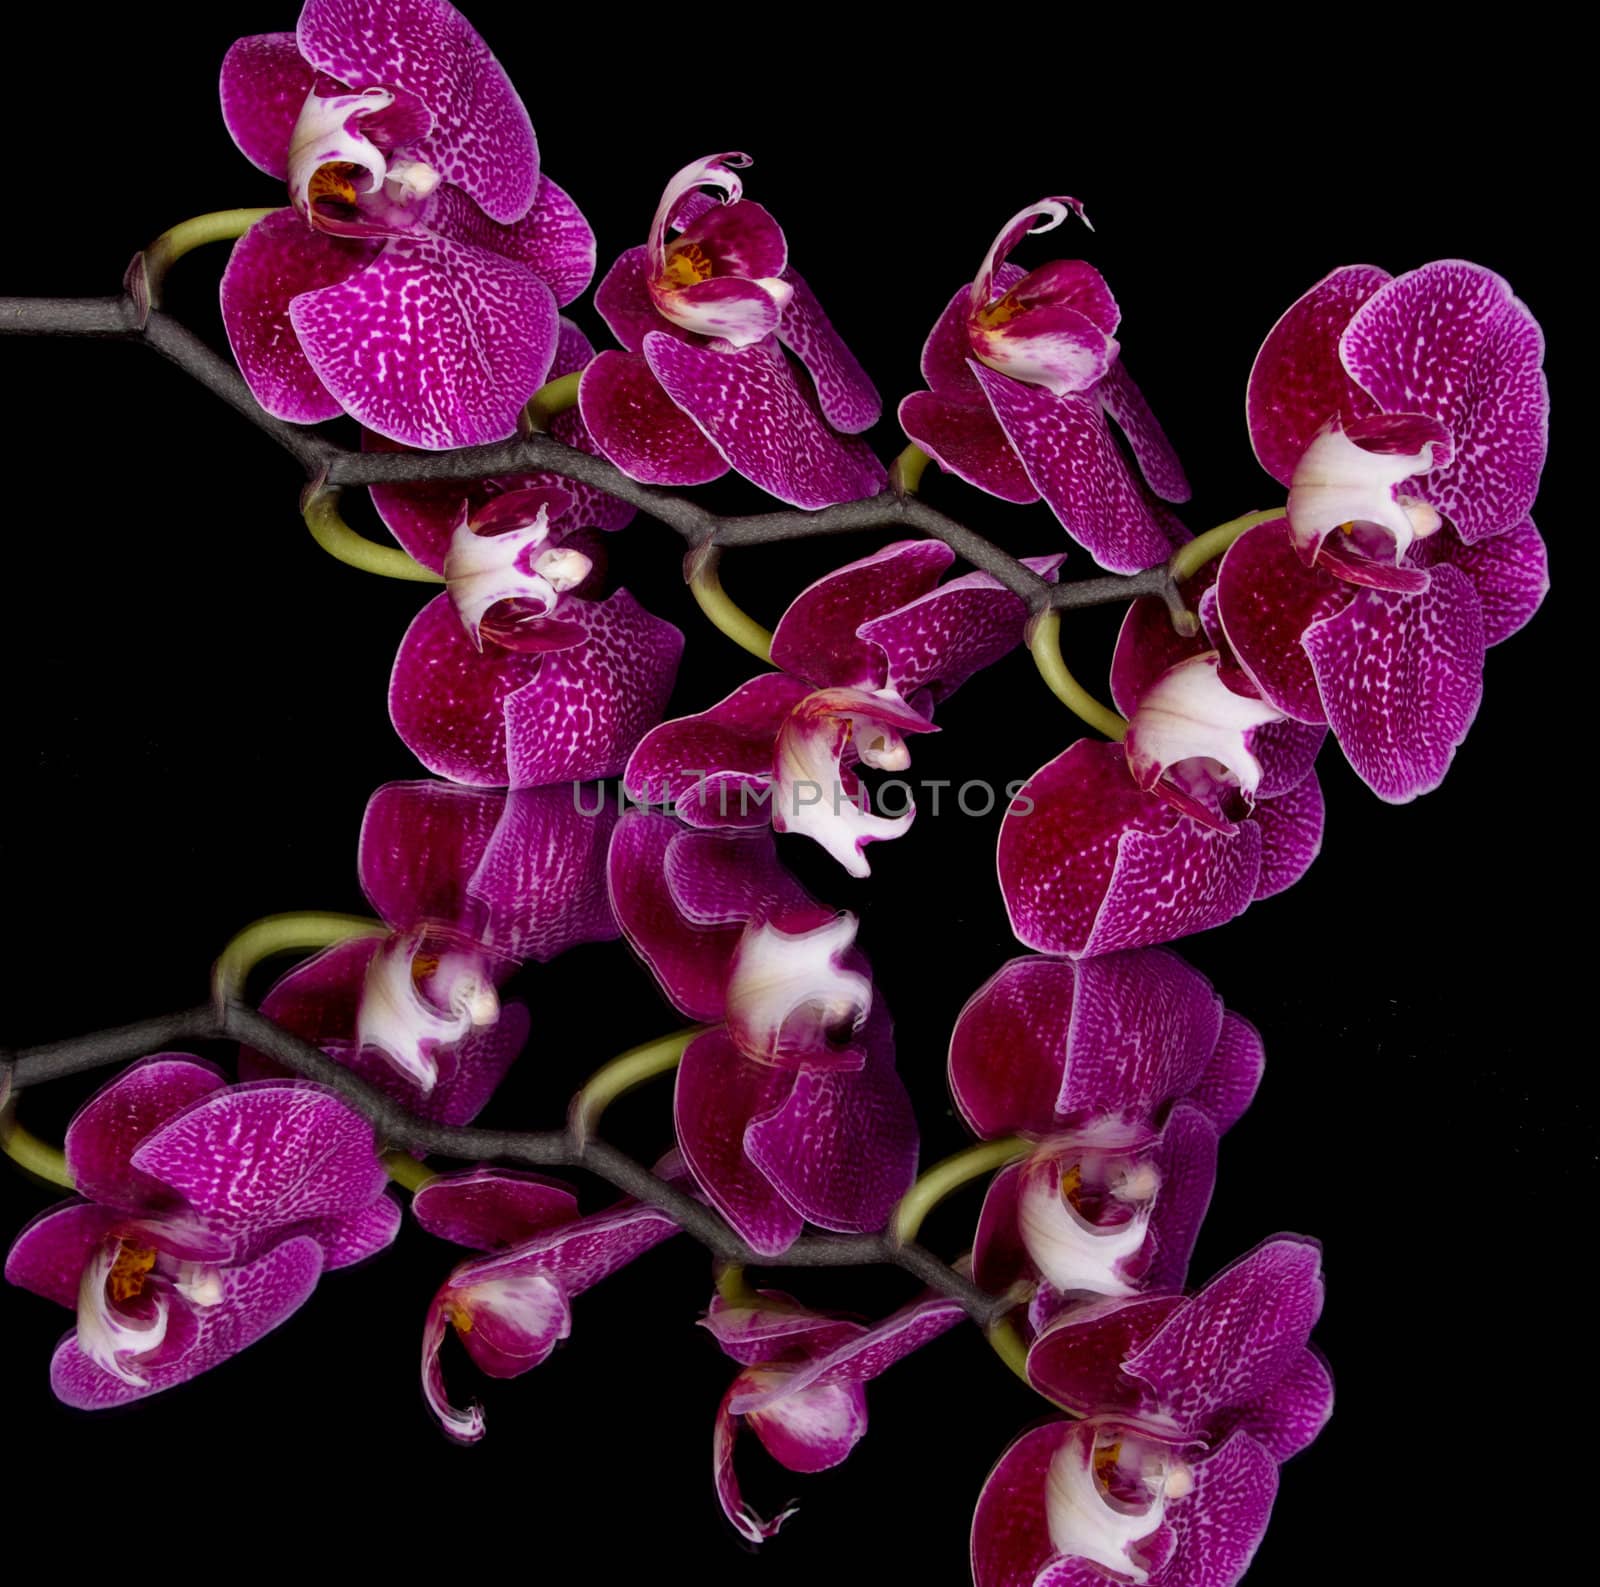 Elegant pink & white orchids isolated on black background with reflection